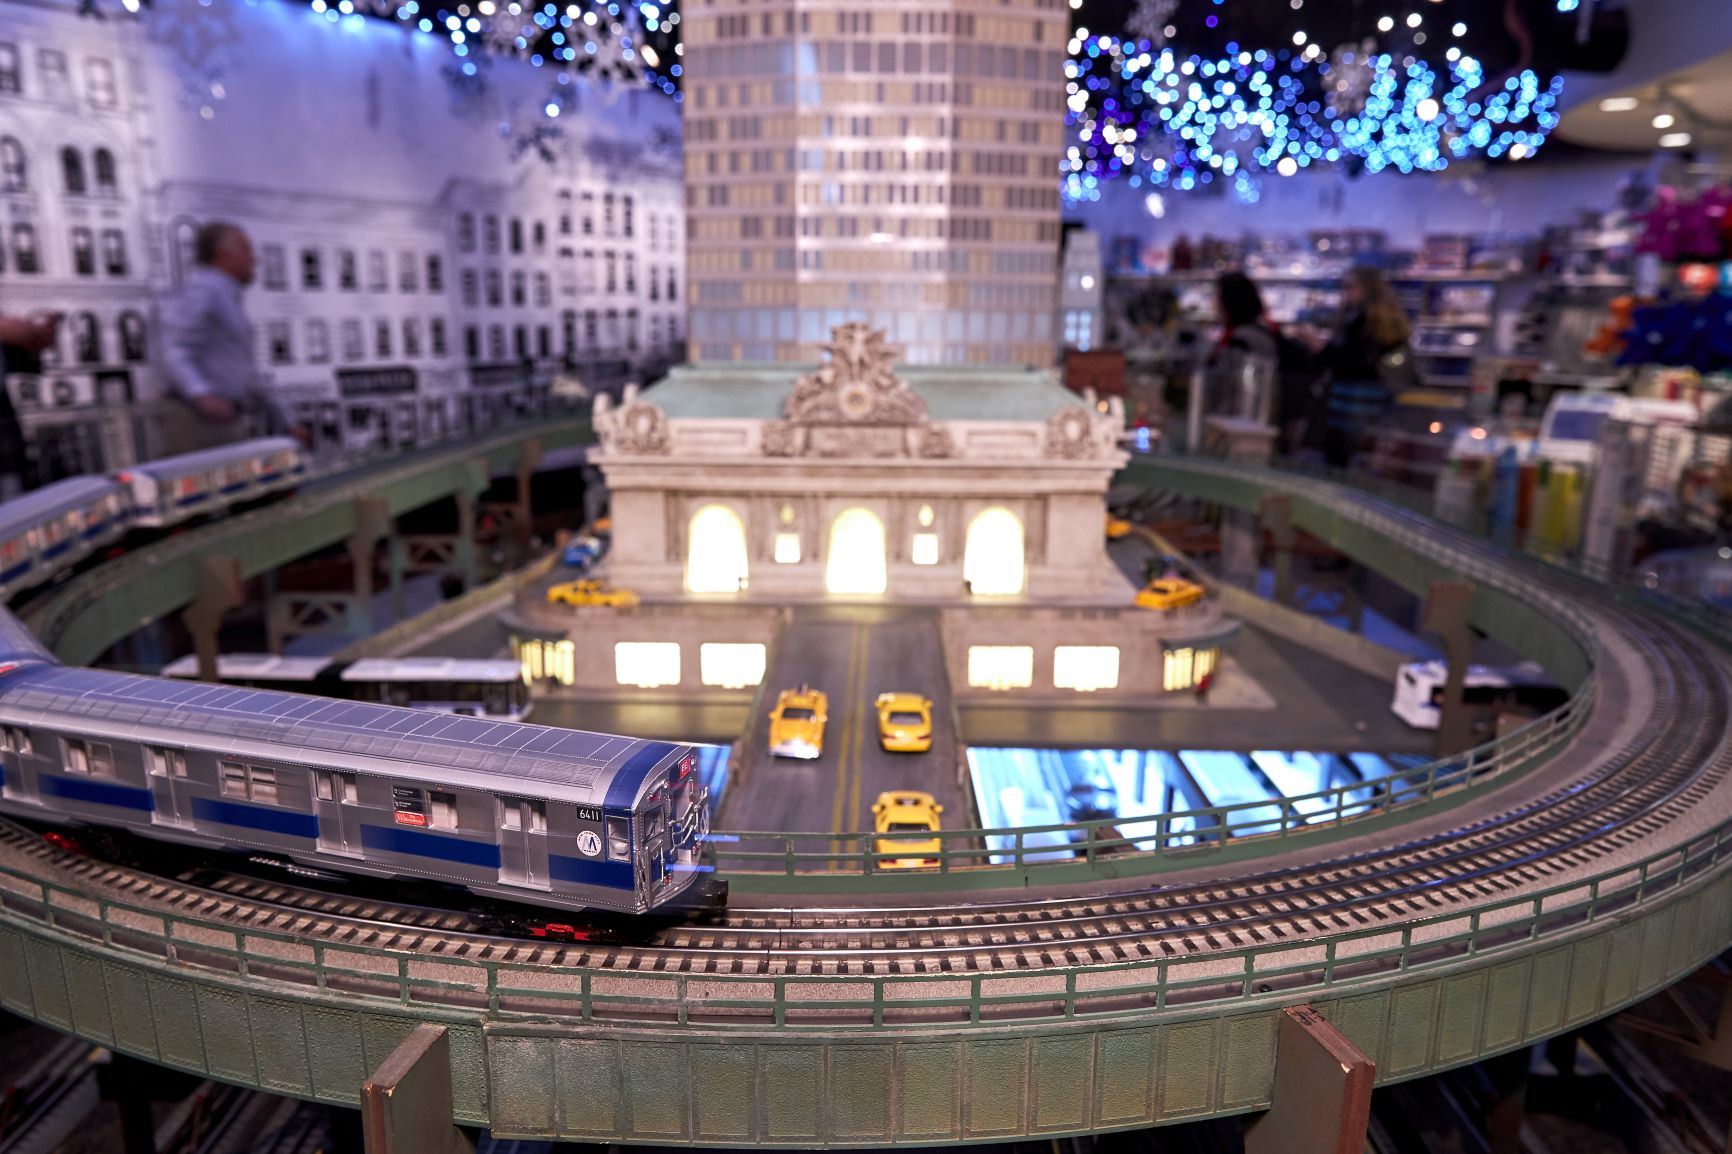 Holiday Train Show Grand Central Terminal